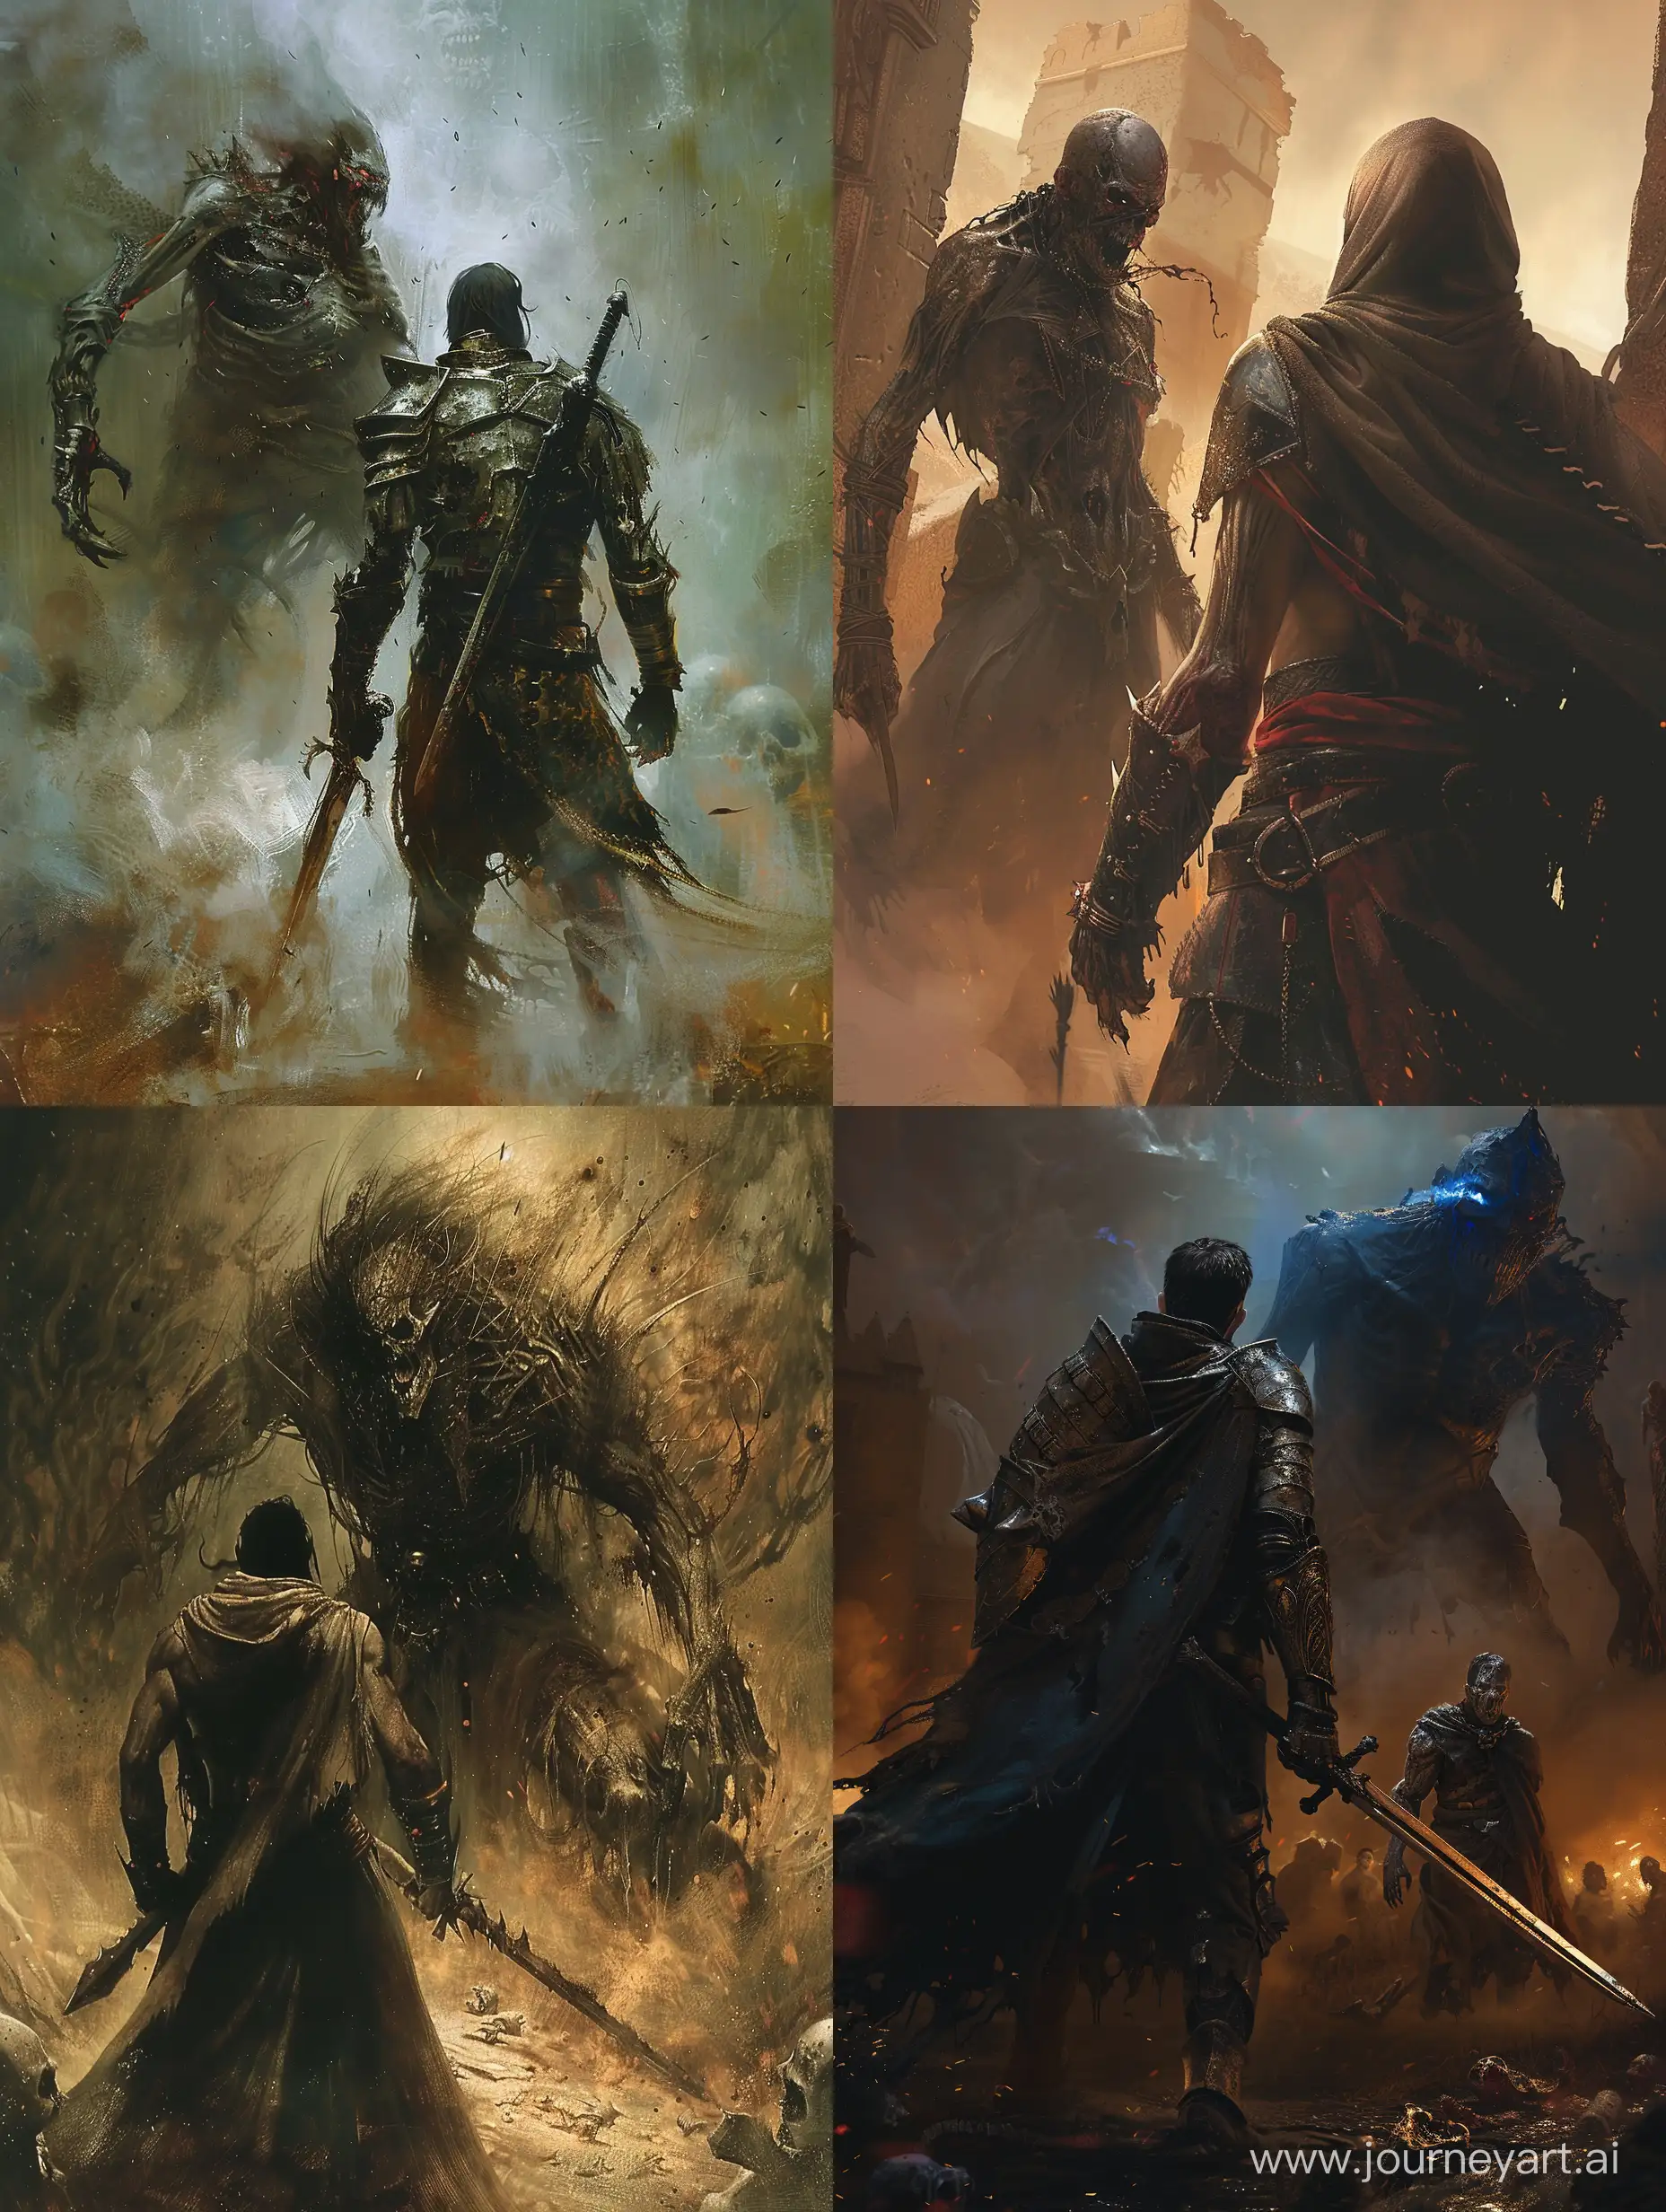 Courageous-Warrior-Confronting-Undead-Abomination-in-Epic-Battle